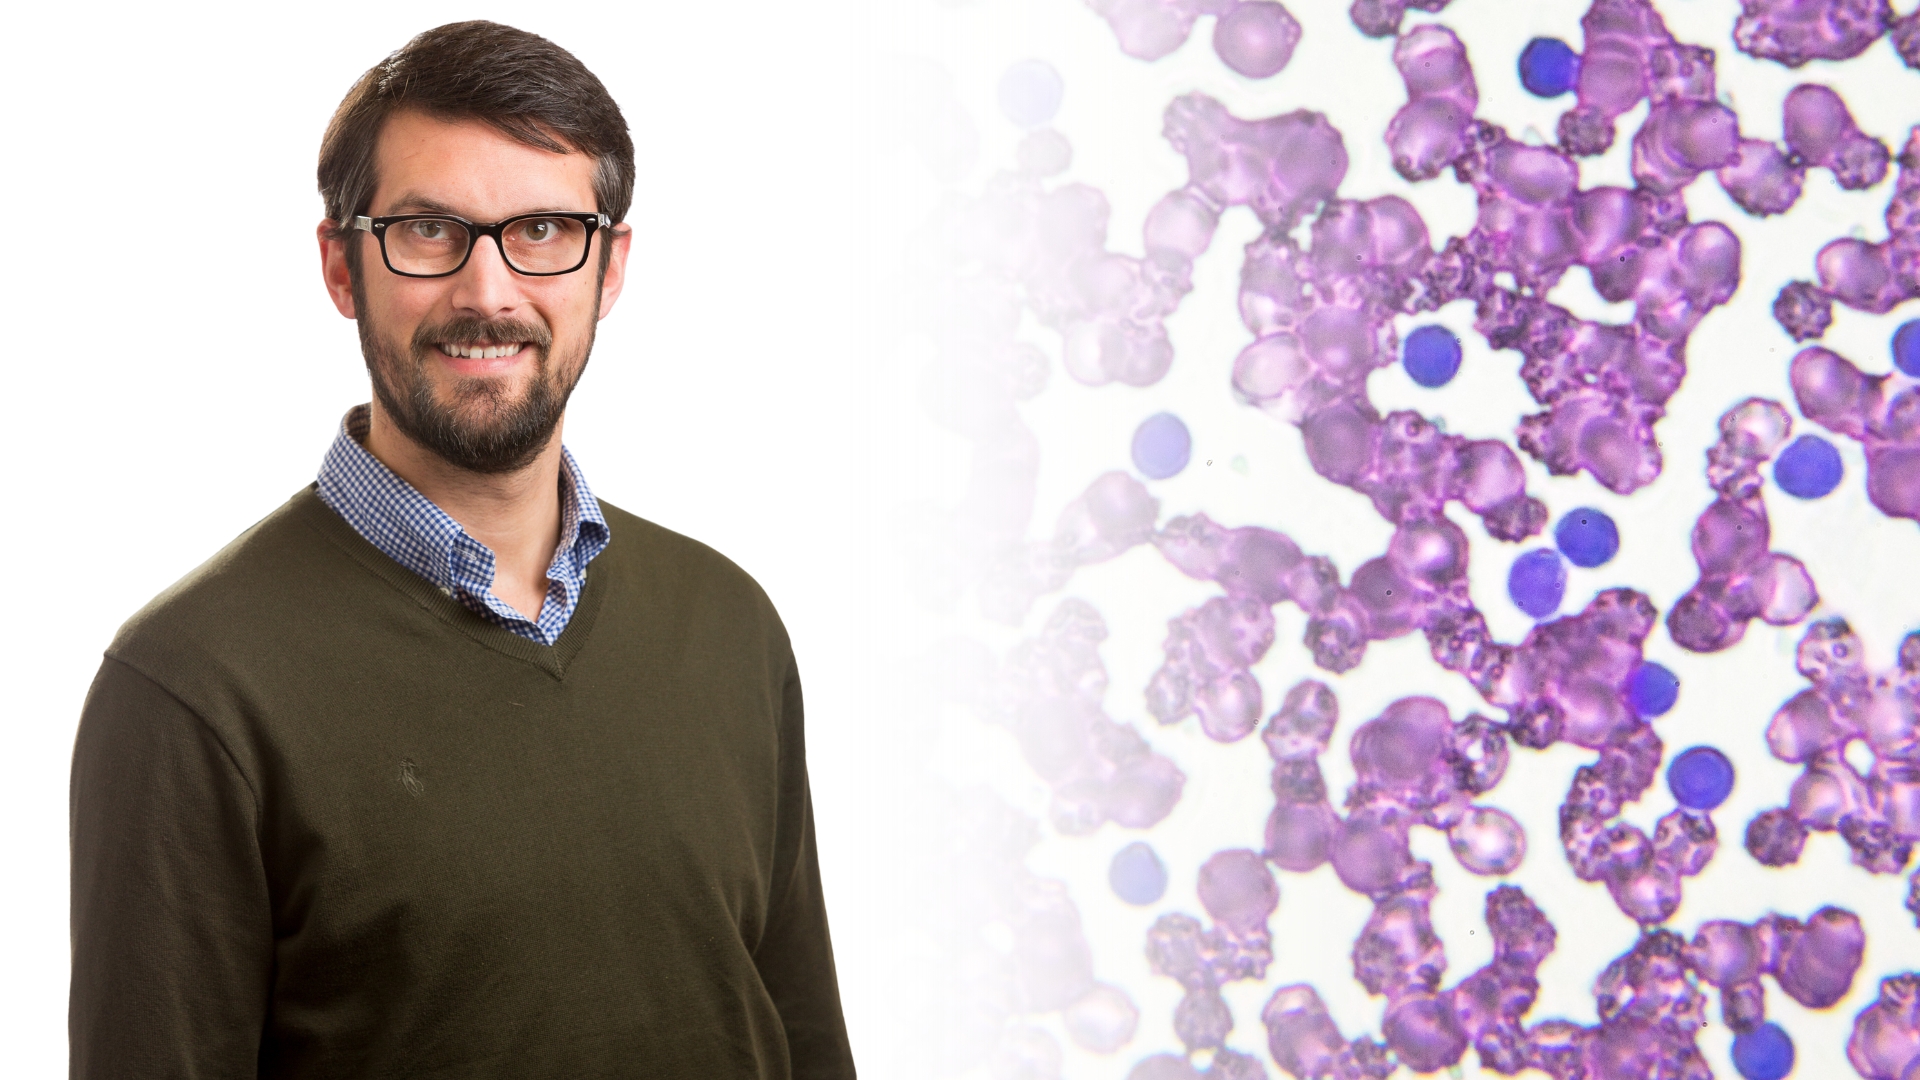 Portrait of Dr Daniel Utzschneider from the Doherty Institute and microscopy image of Chronic Lymphocytic Leukemia (CLL) blood smear